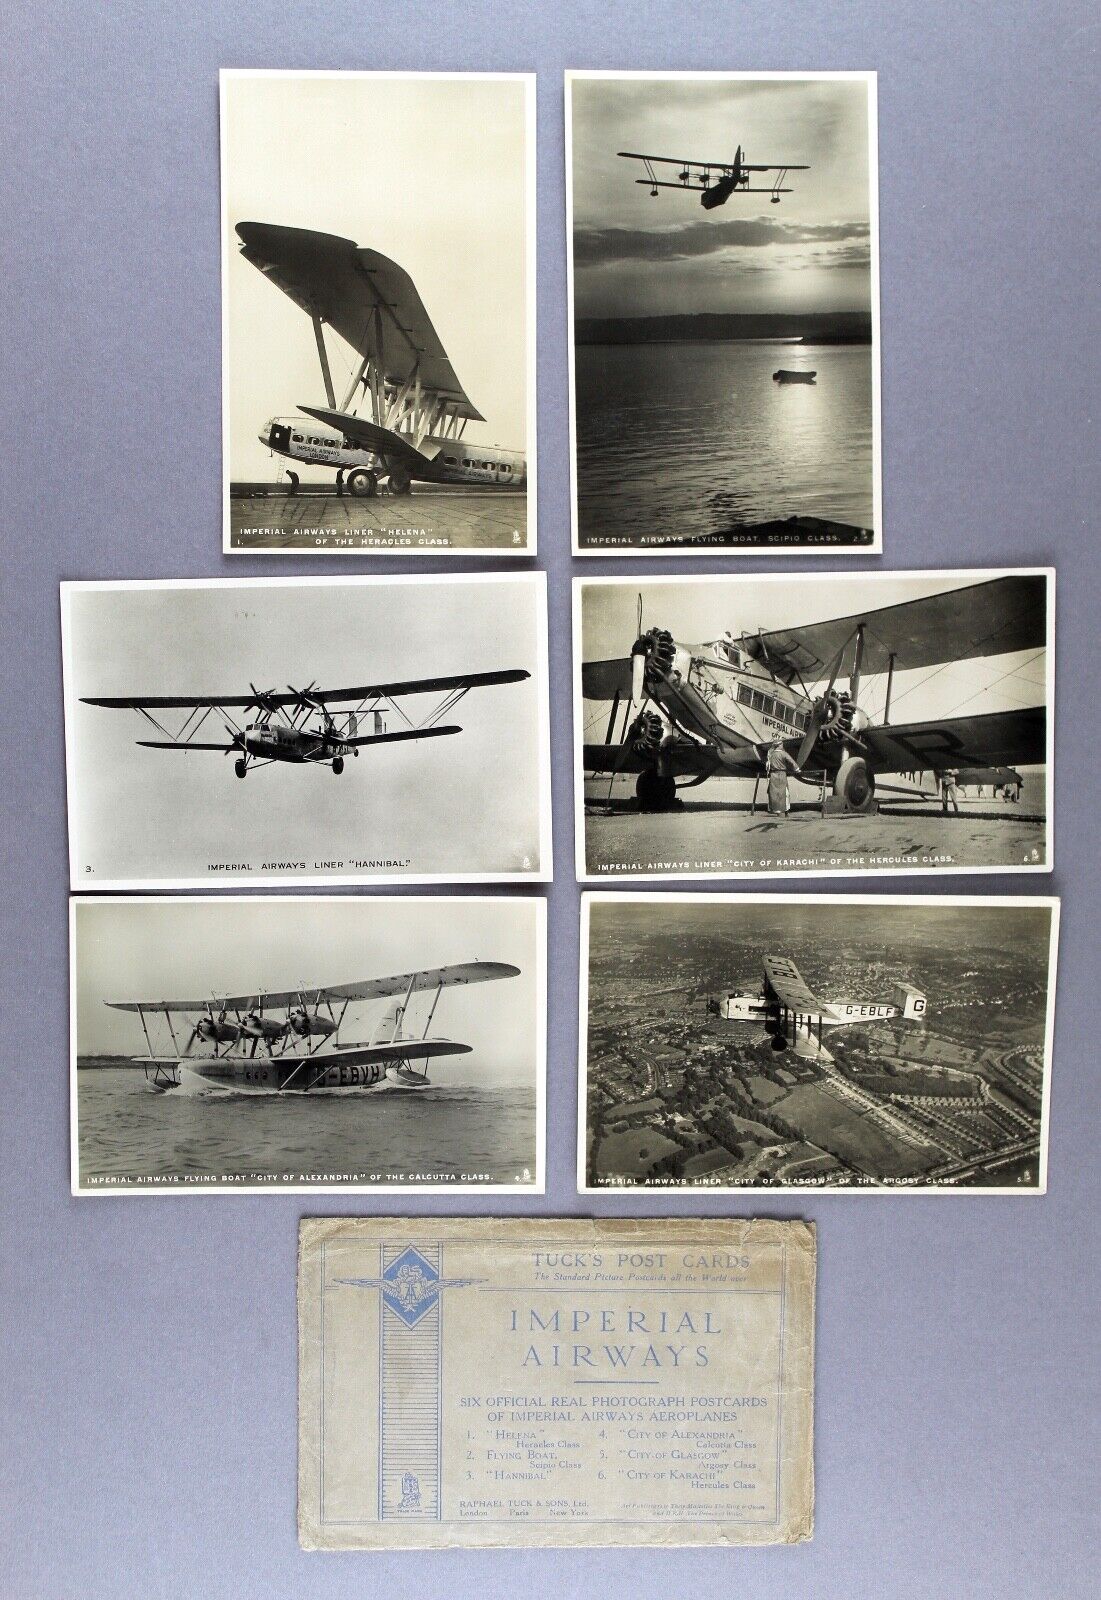 IMPERIAL AIRWAYS TUCKS POSTCARDS SET OF 6 CARDS WITH ENVELOPE RPPC FLYING BOATS